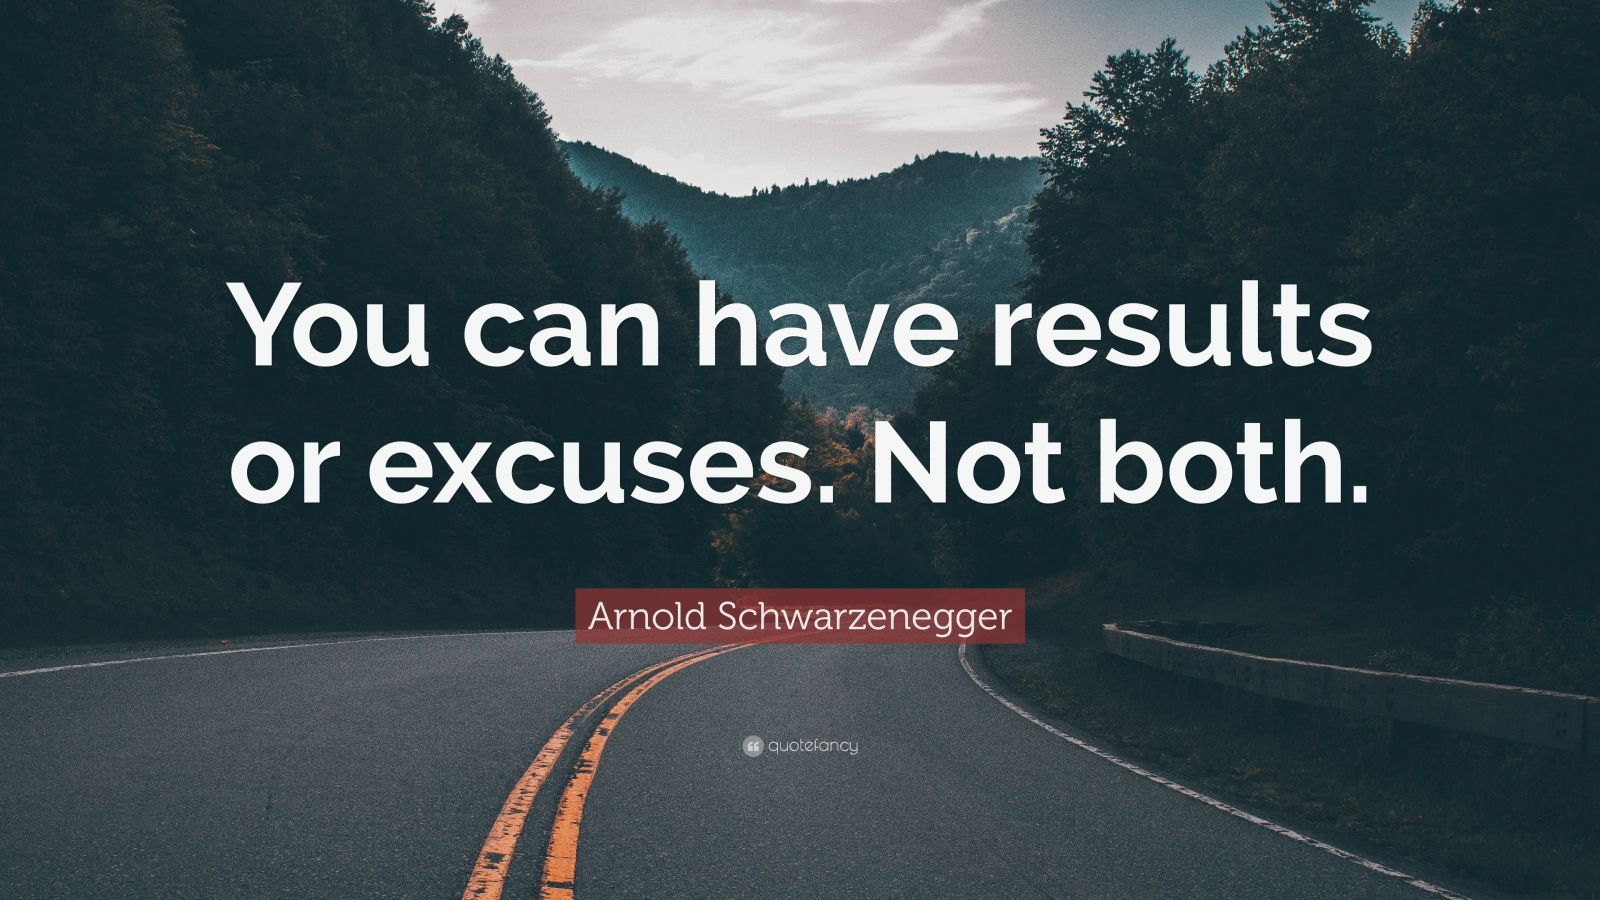 Arnold Schwarzenegger Quote: “You can have results or excuses. Not both